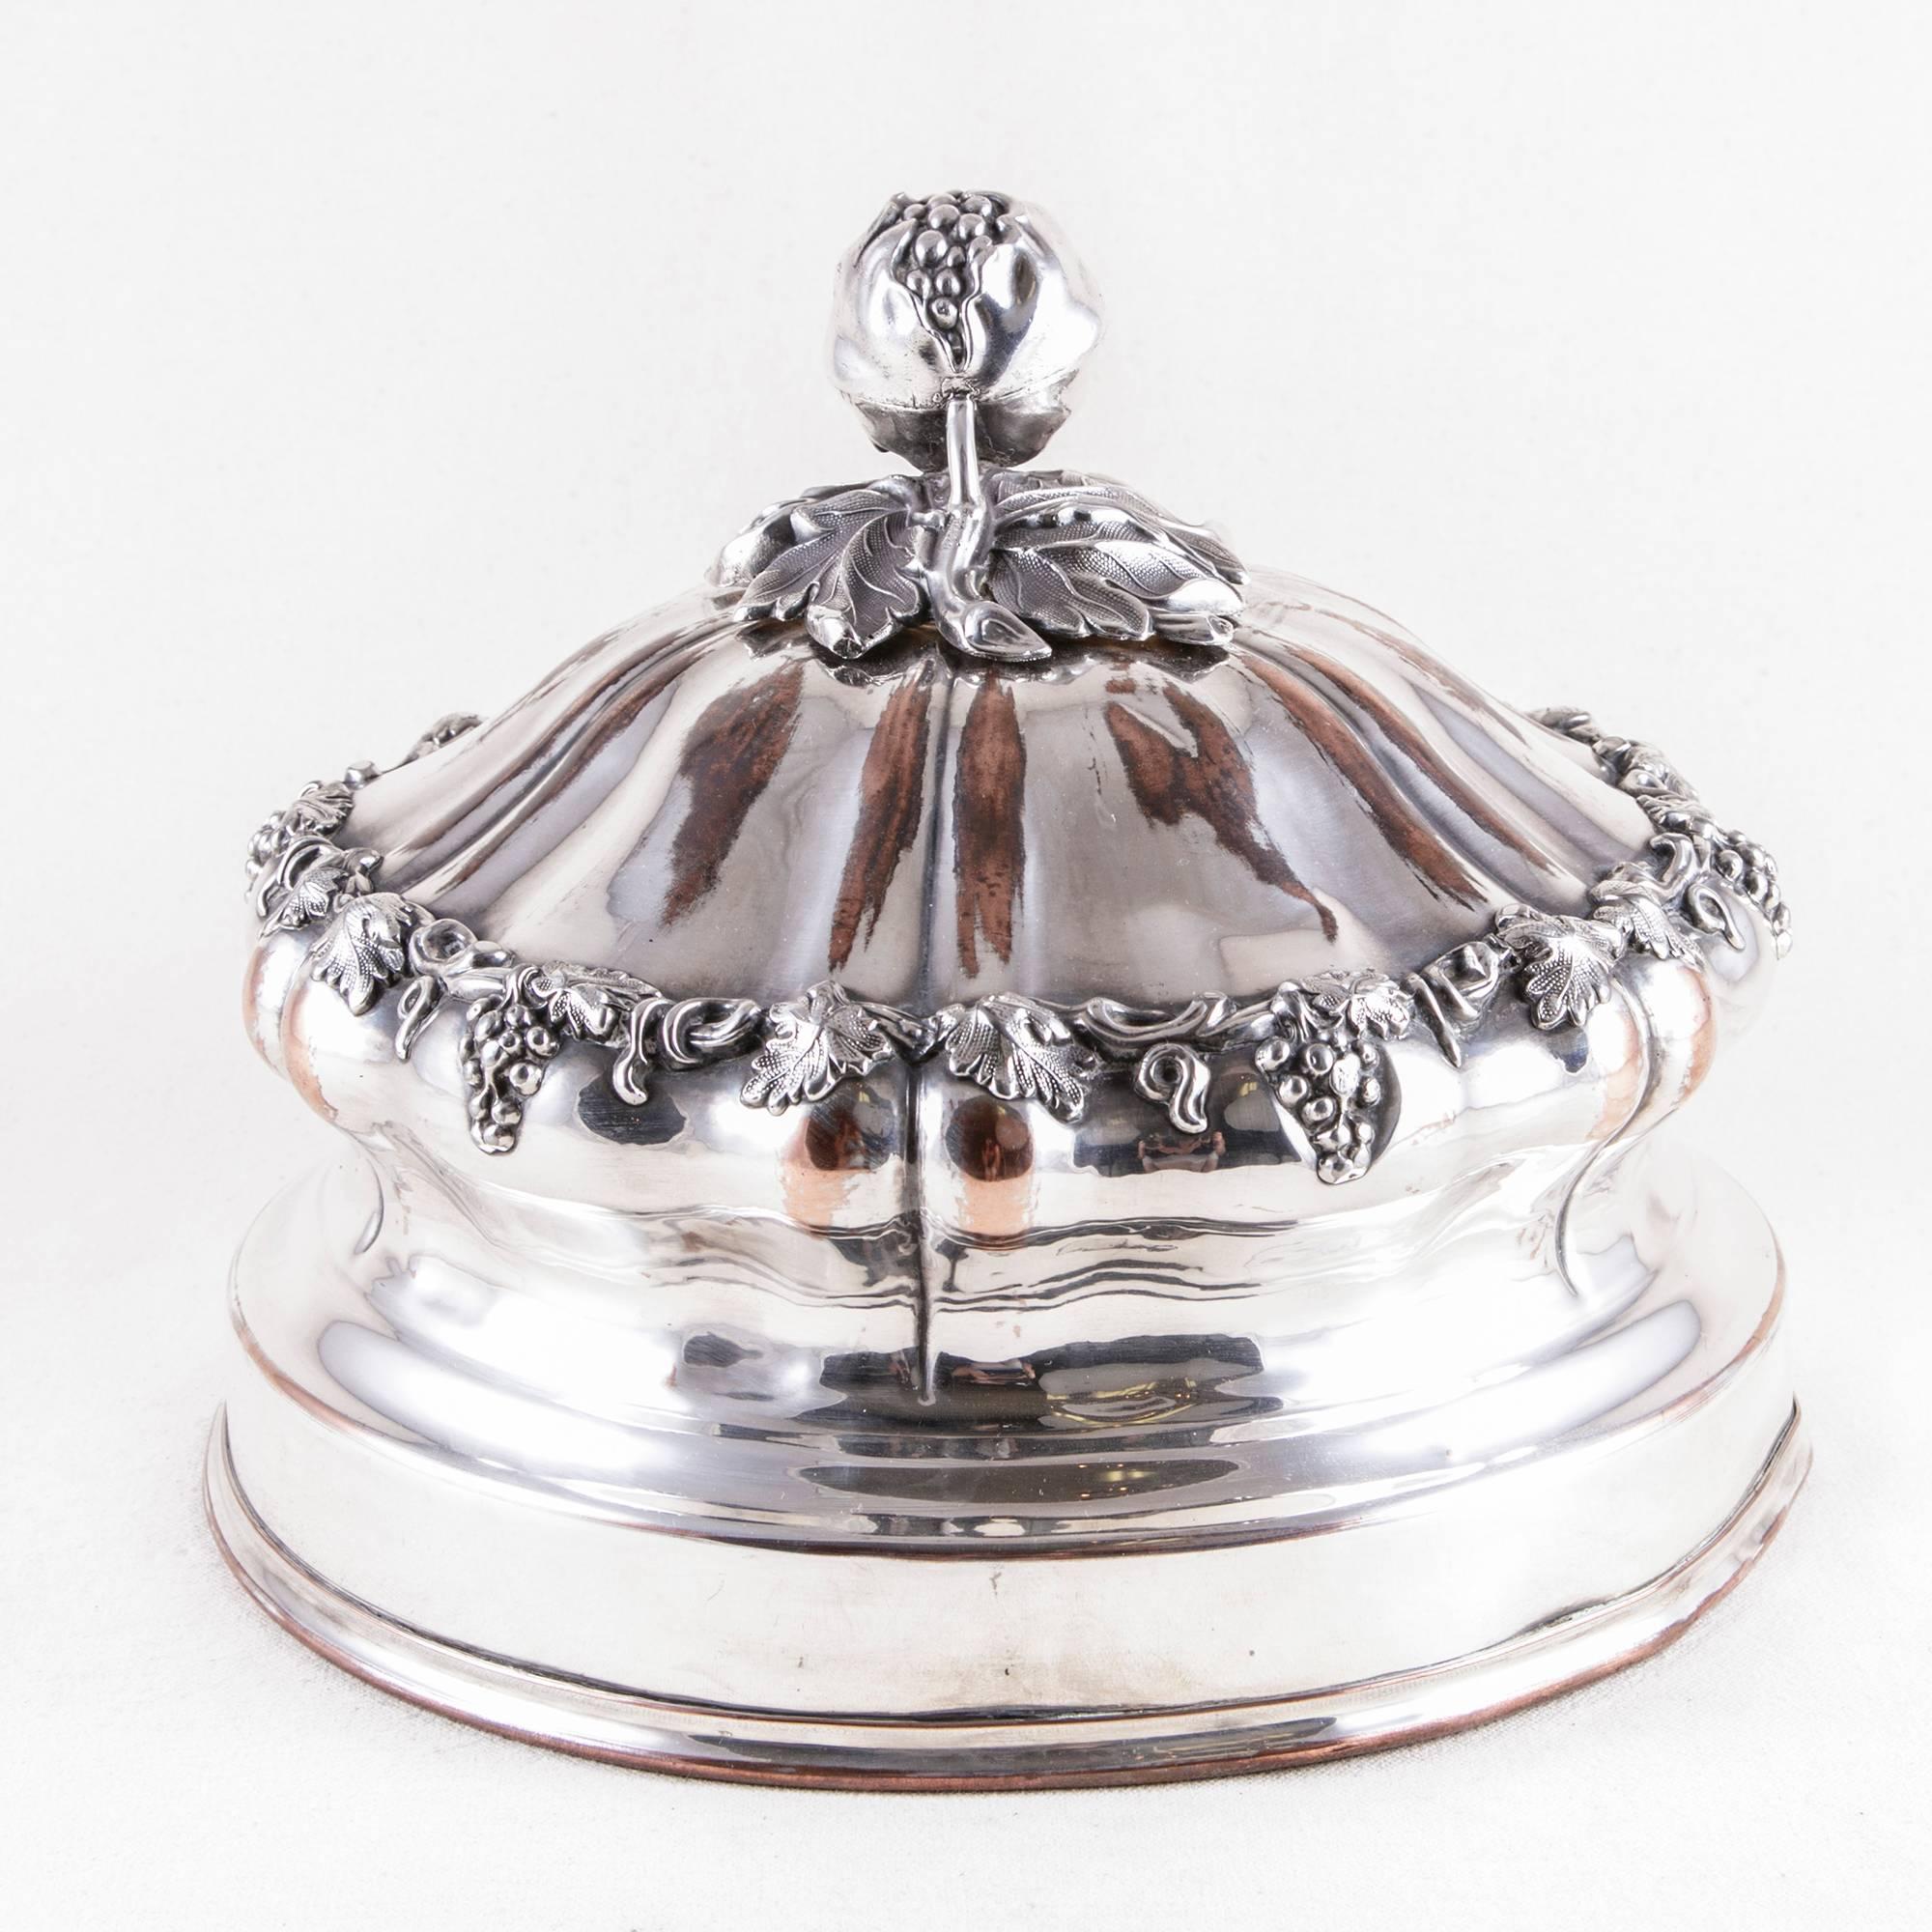 19th Century French Silver Hotel Dome Serving Piece Food Warmer Dish Cover For Sale 4